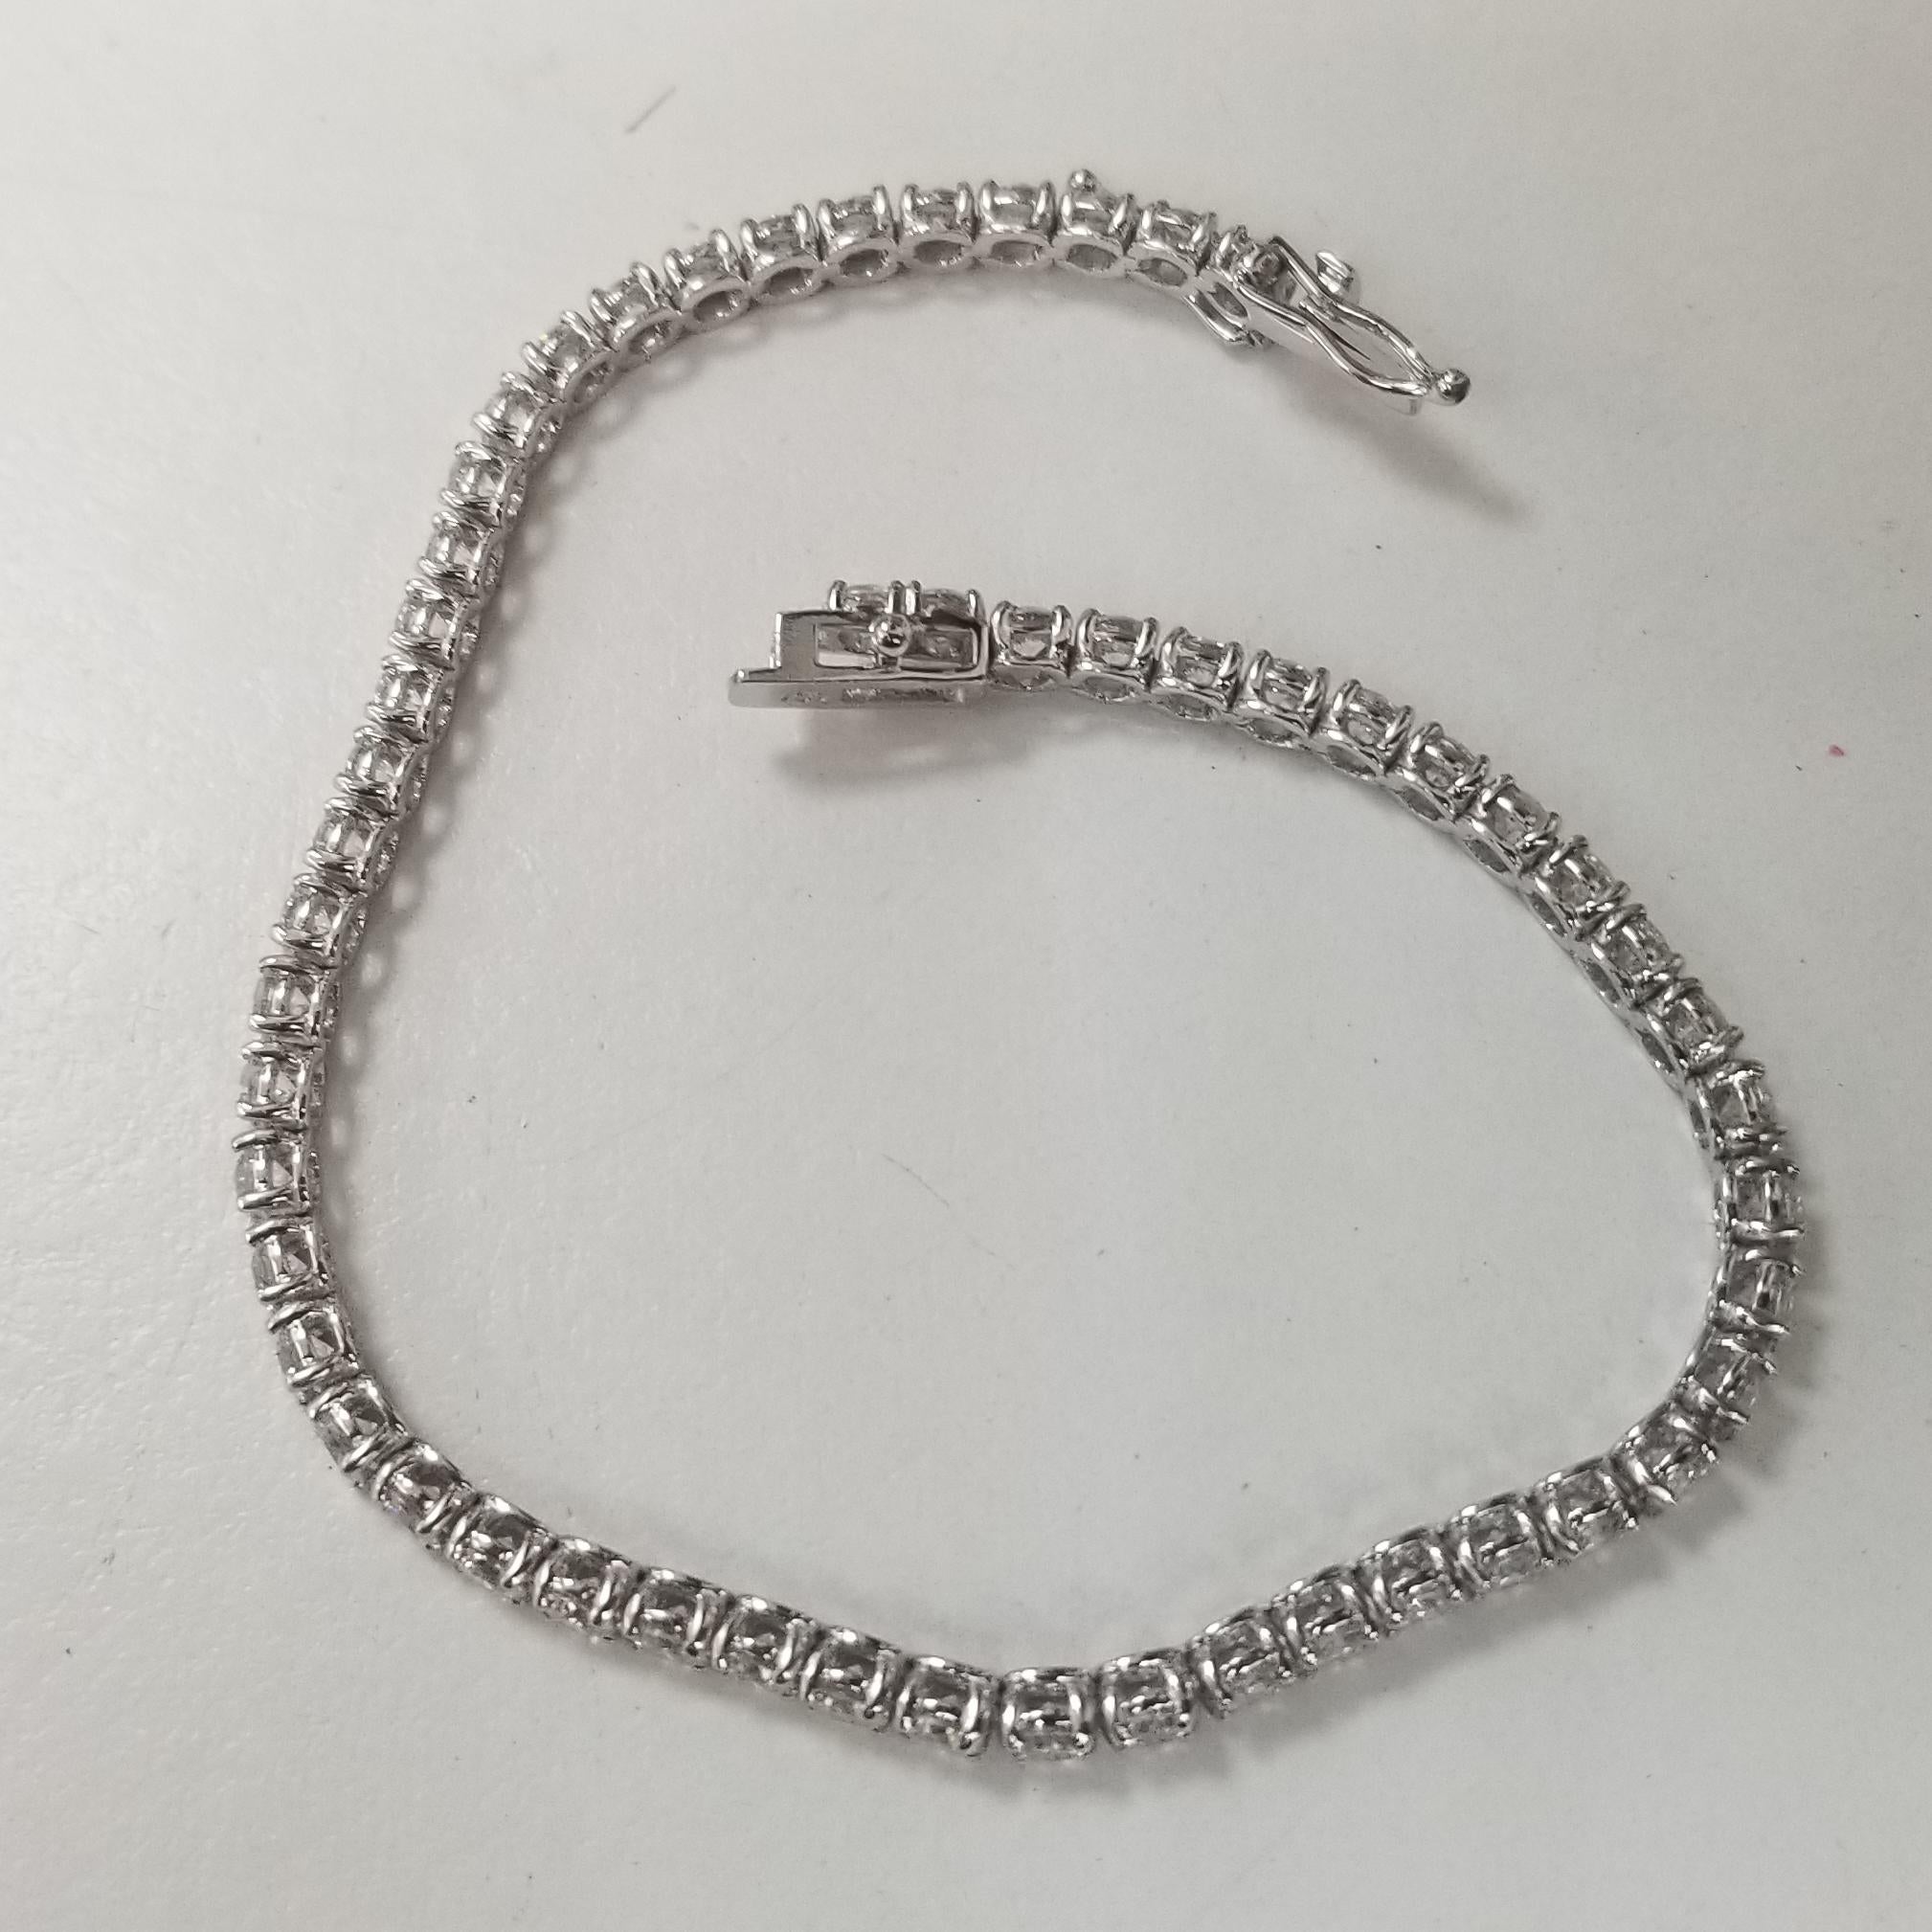 This is very beautiful 18k white gold custom made tennis bracelet with 55 round diamonds color F-G and clarity VS2-SI1 weighing 5.40cts. very fine quality diamonds, bracelet measures 7 inches with clasp and safety.
Specifications:
    main stone: